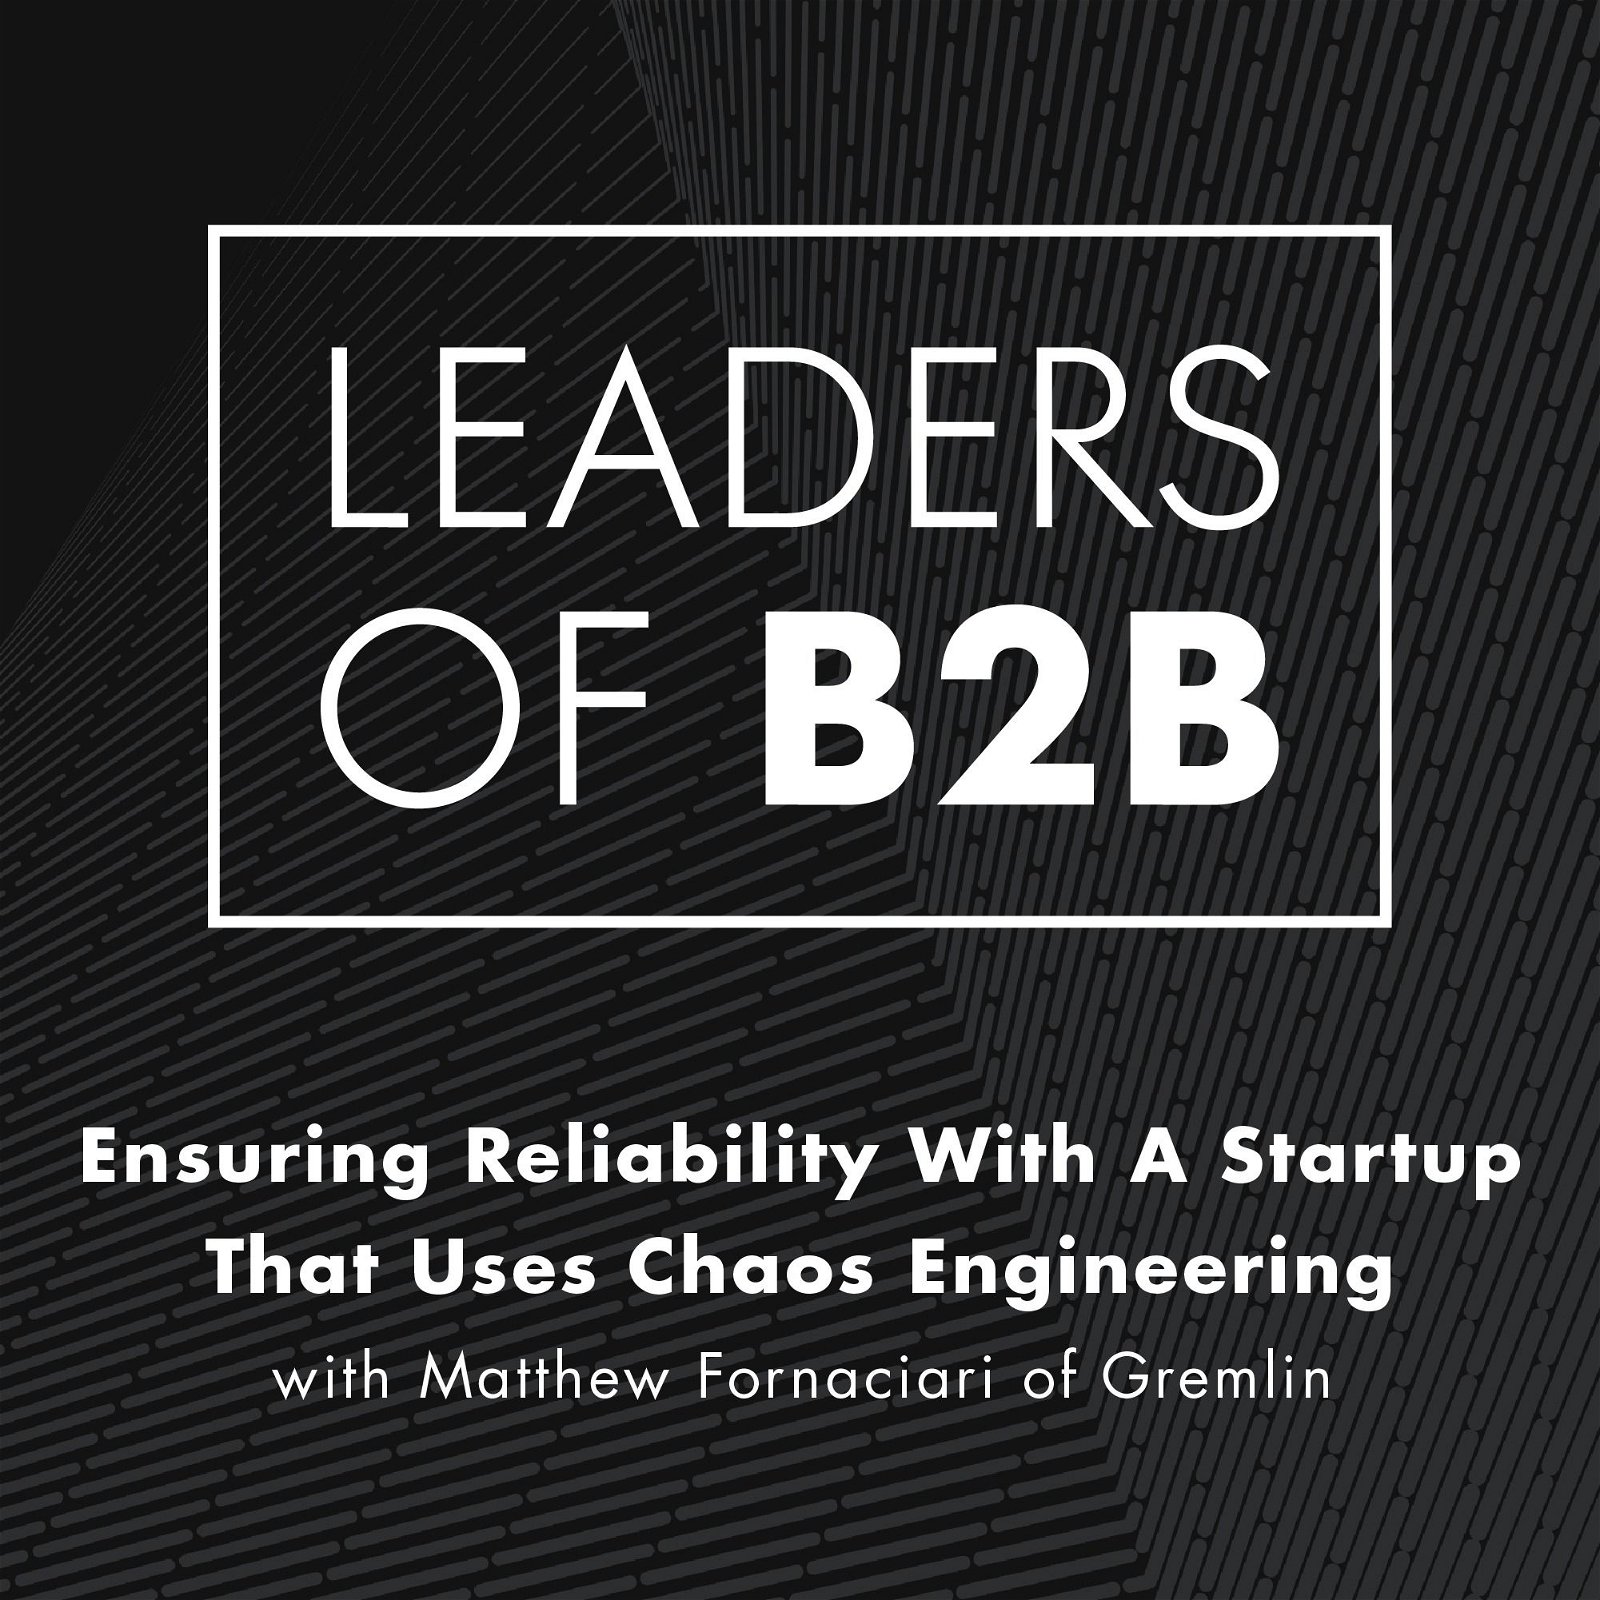 Ensuring Reliability With A Startup That Uses Chaos Engineering with Matthew Fornaciari of Gremlin